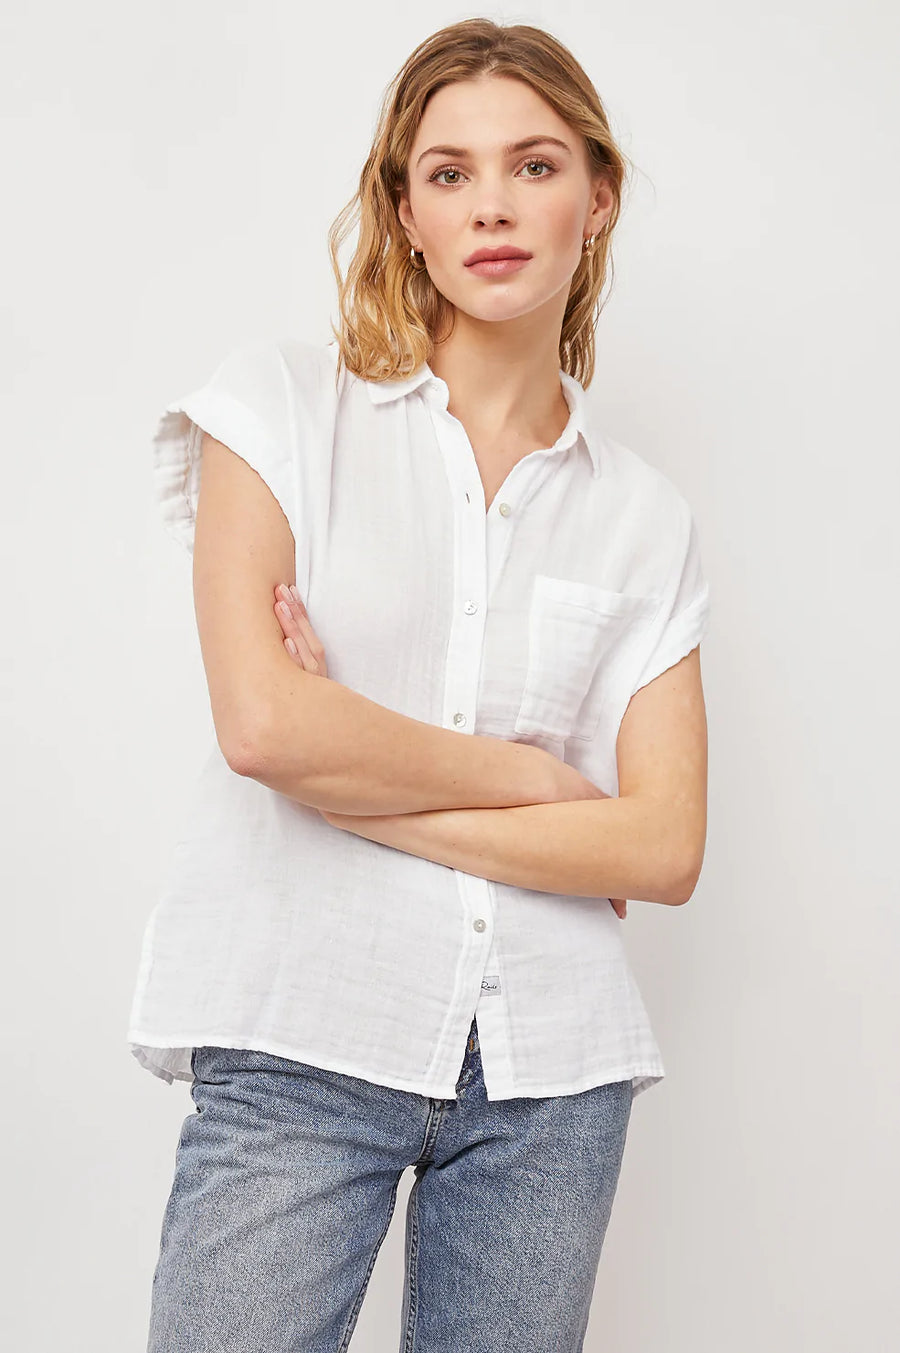 RAILS Whitney Shirt in Color: 